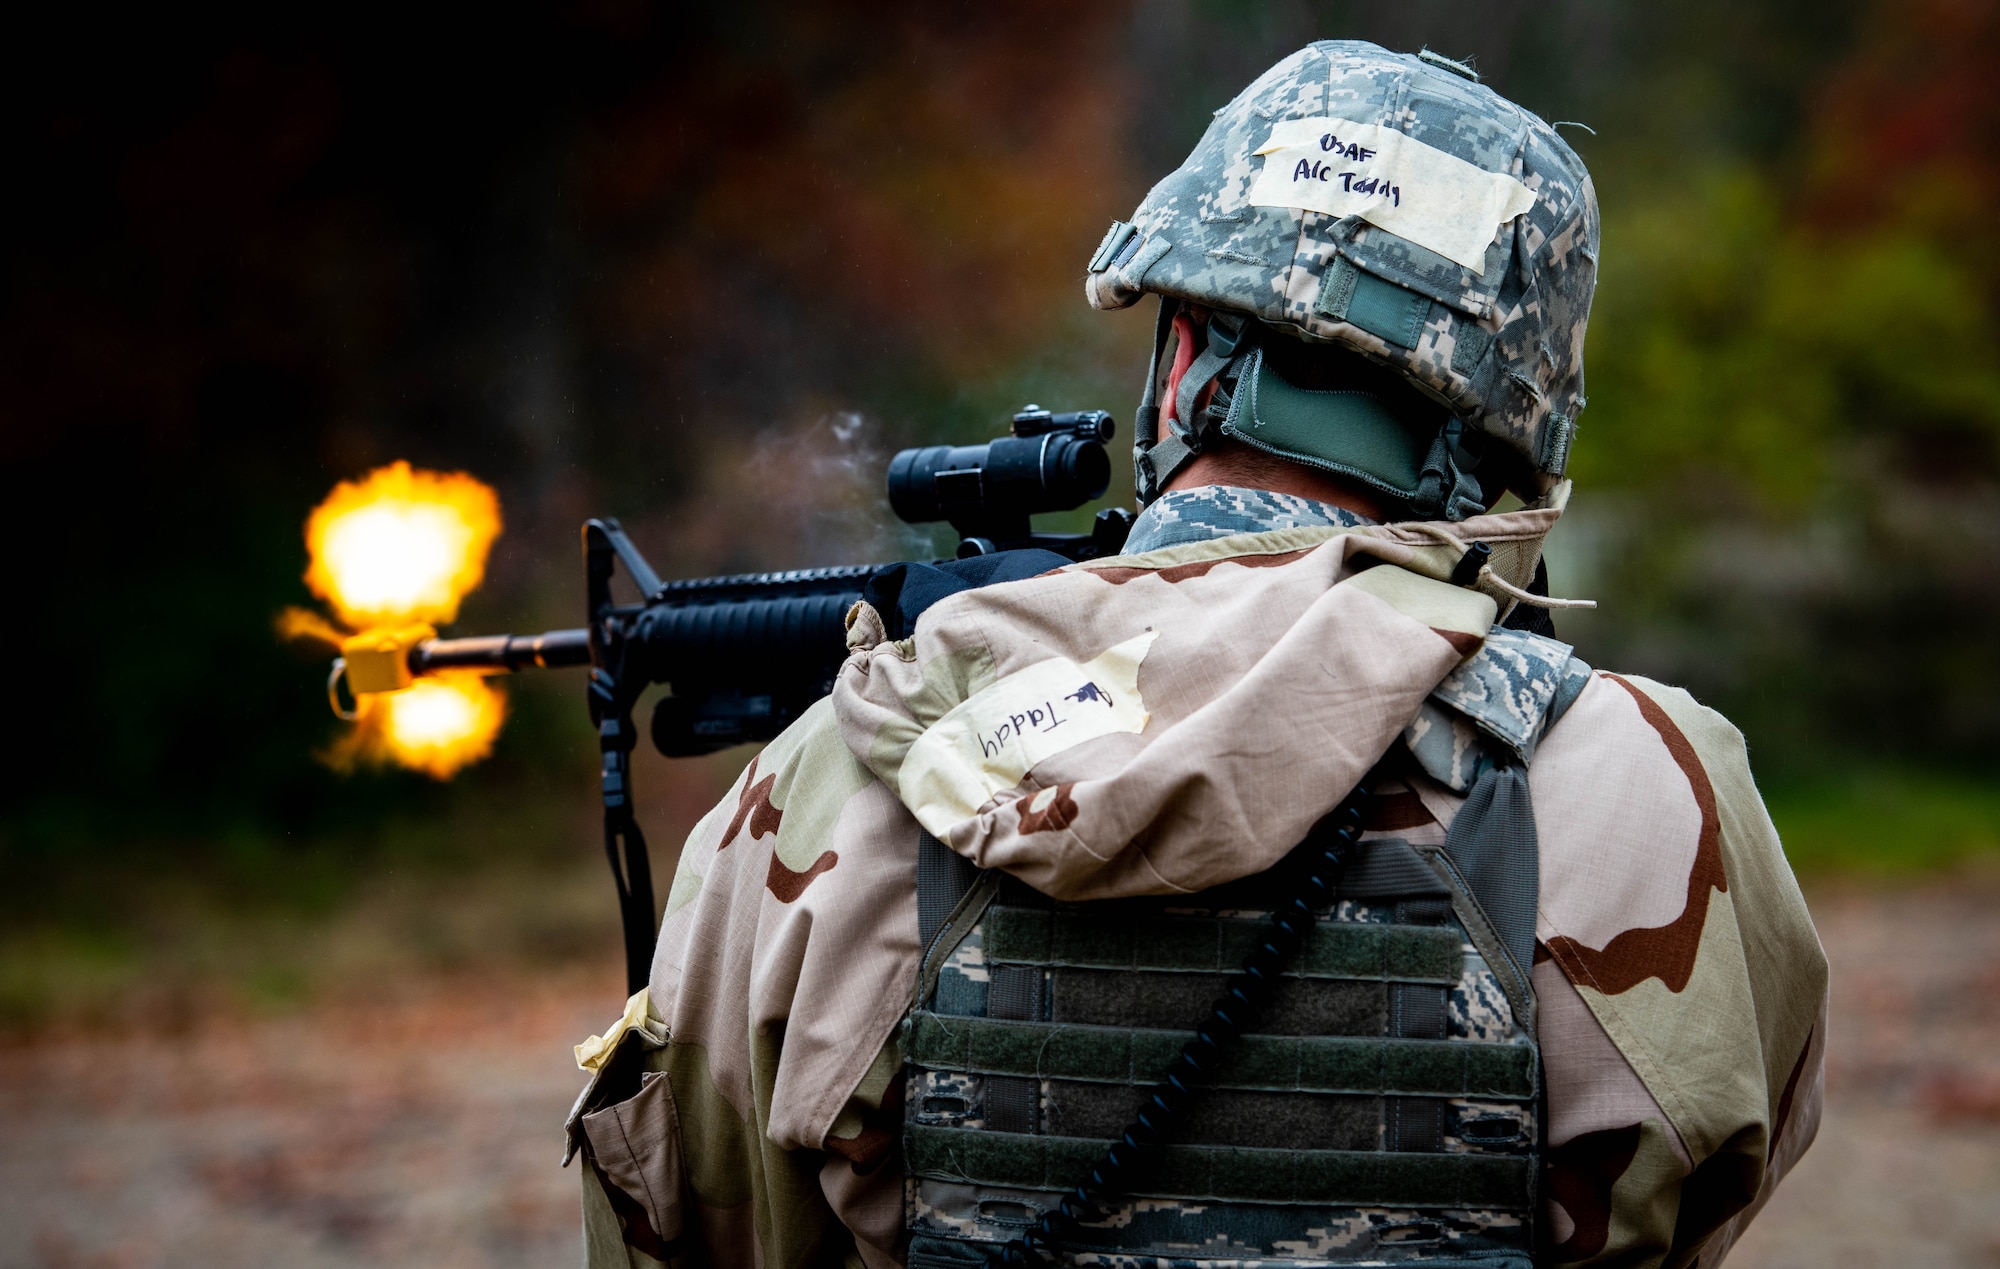 Airman 1st Class Alec Taddy, 375th Security Forces Squadron entry controller, fires a blank firearm cartridge during a mobility exercise at Scott Air Force Base, Ill., Nov. 6, 2019. The MOBEX allowed Airmen to practice their response to challenges such as combat and chemical warfare. (U.S. Air Force photo by Senior Airman Tara Stetler)